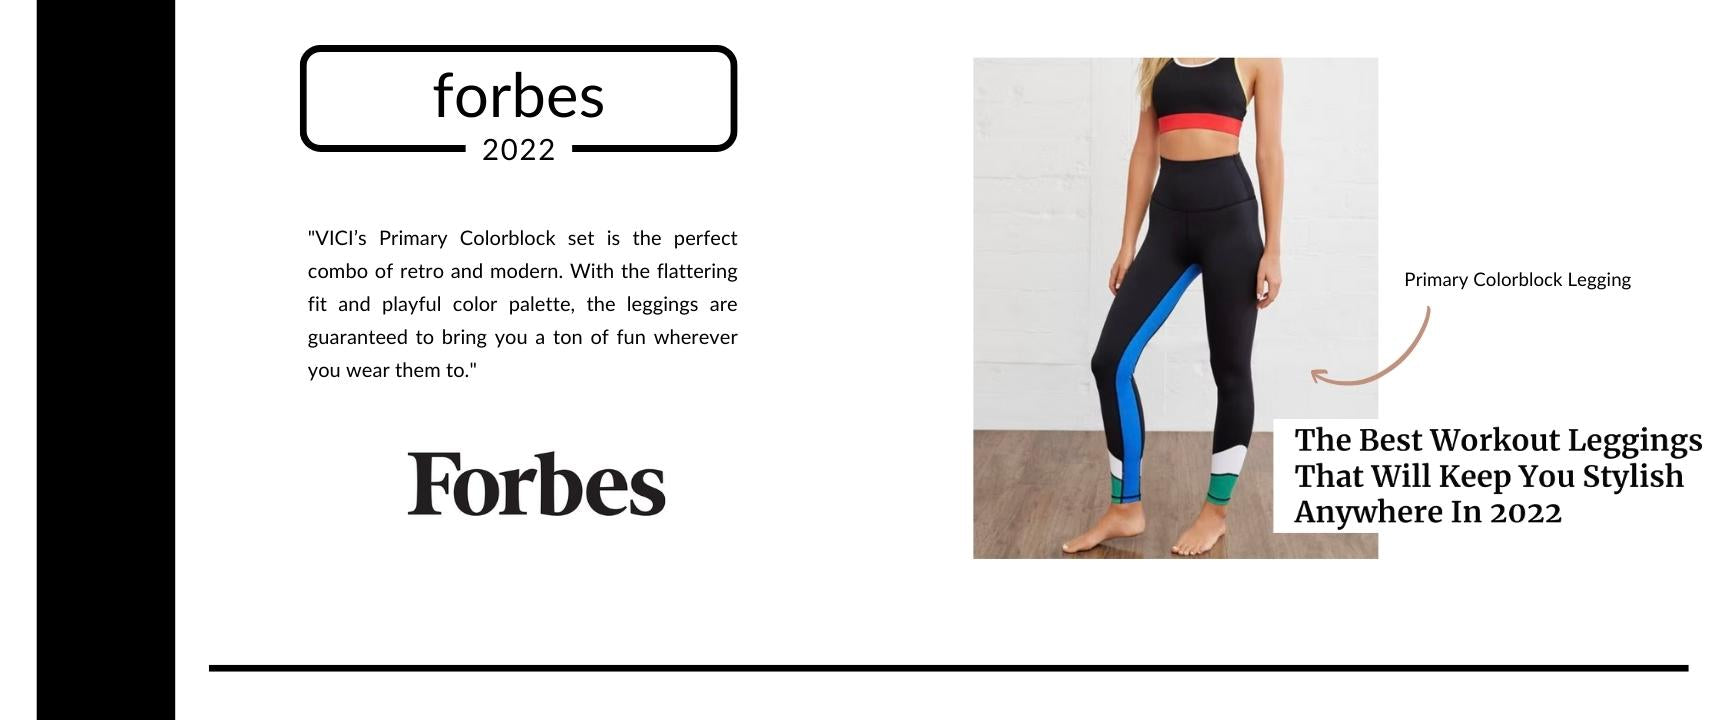 VICI’s Primary Colorblock set is the perfect combo of retro and modern. With the flattering fit and playful color palette, the leggings are guaranteed to bring you a ton of fun wherever you wear them to.